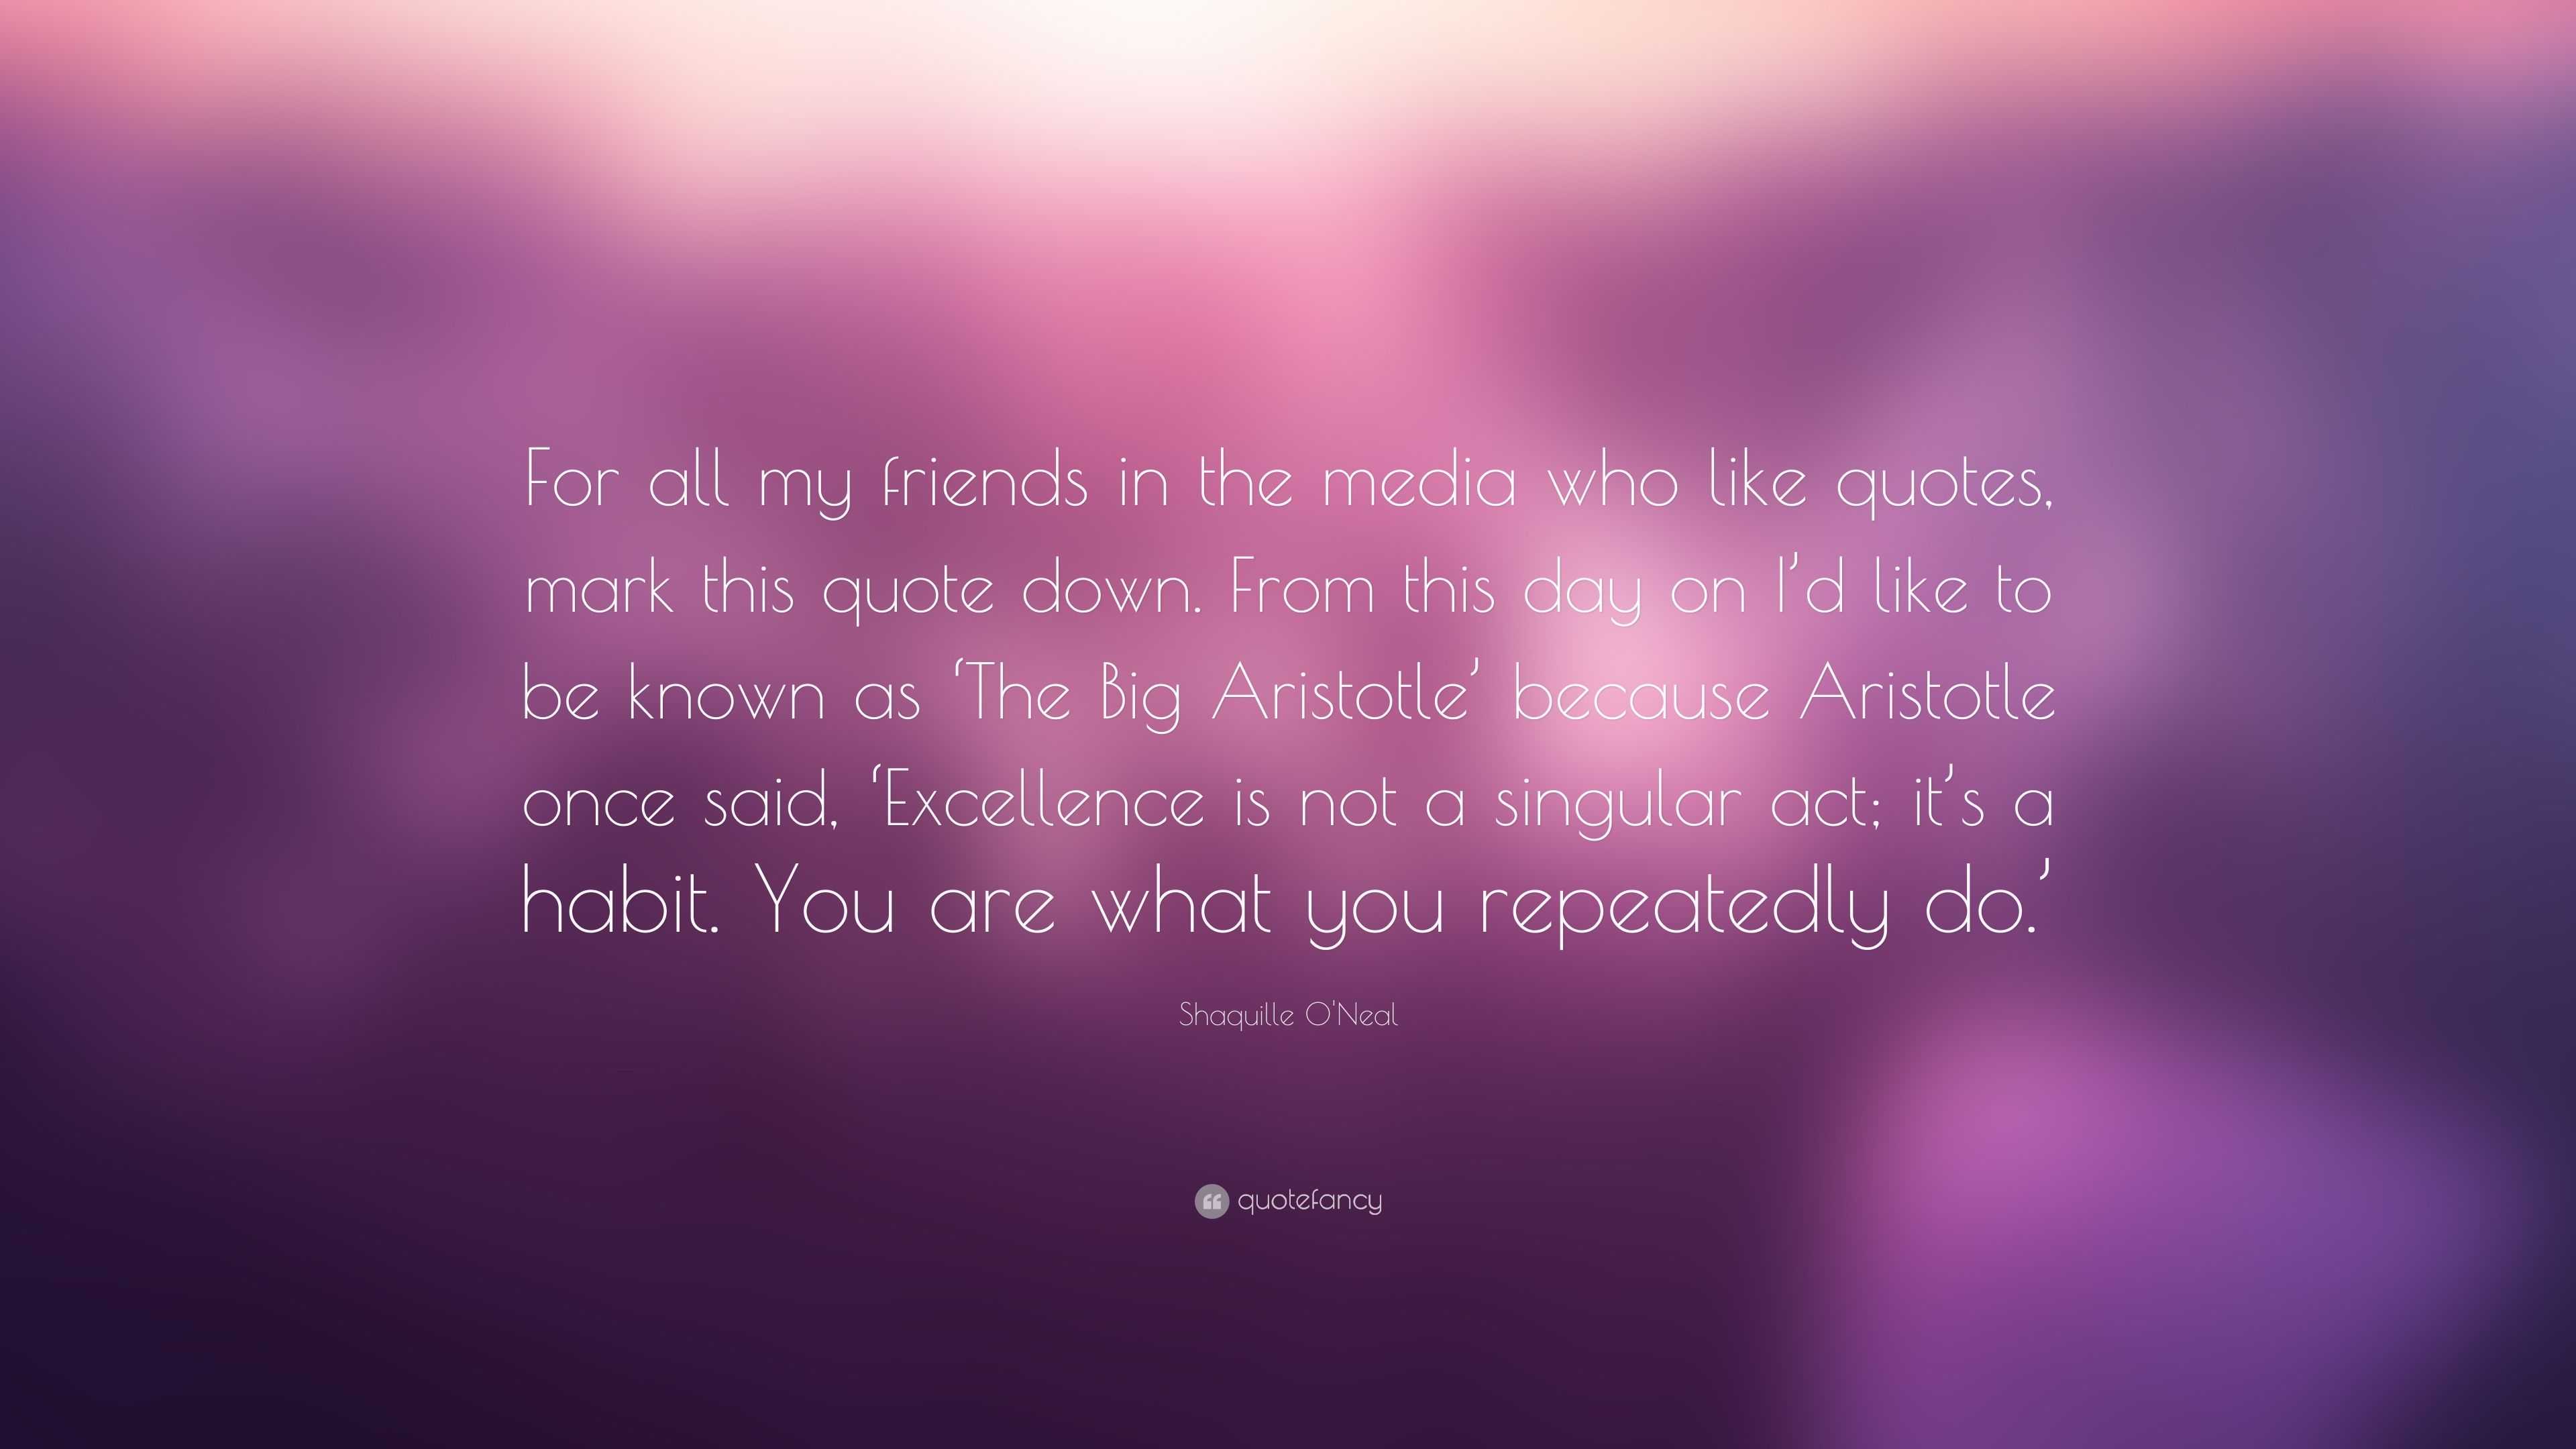 Shaquille O'Neal Quote: “For all my friends in the media who like